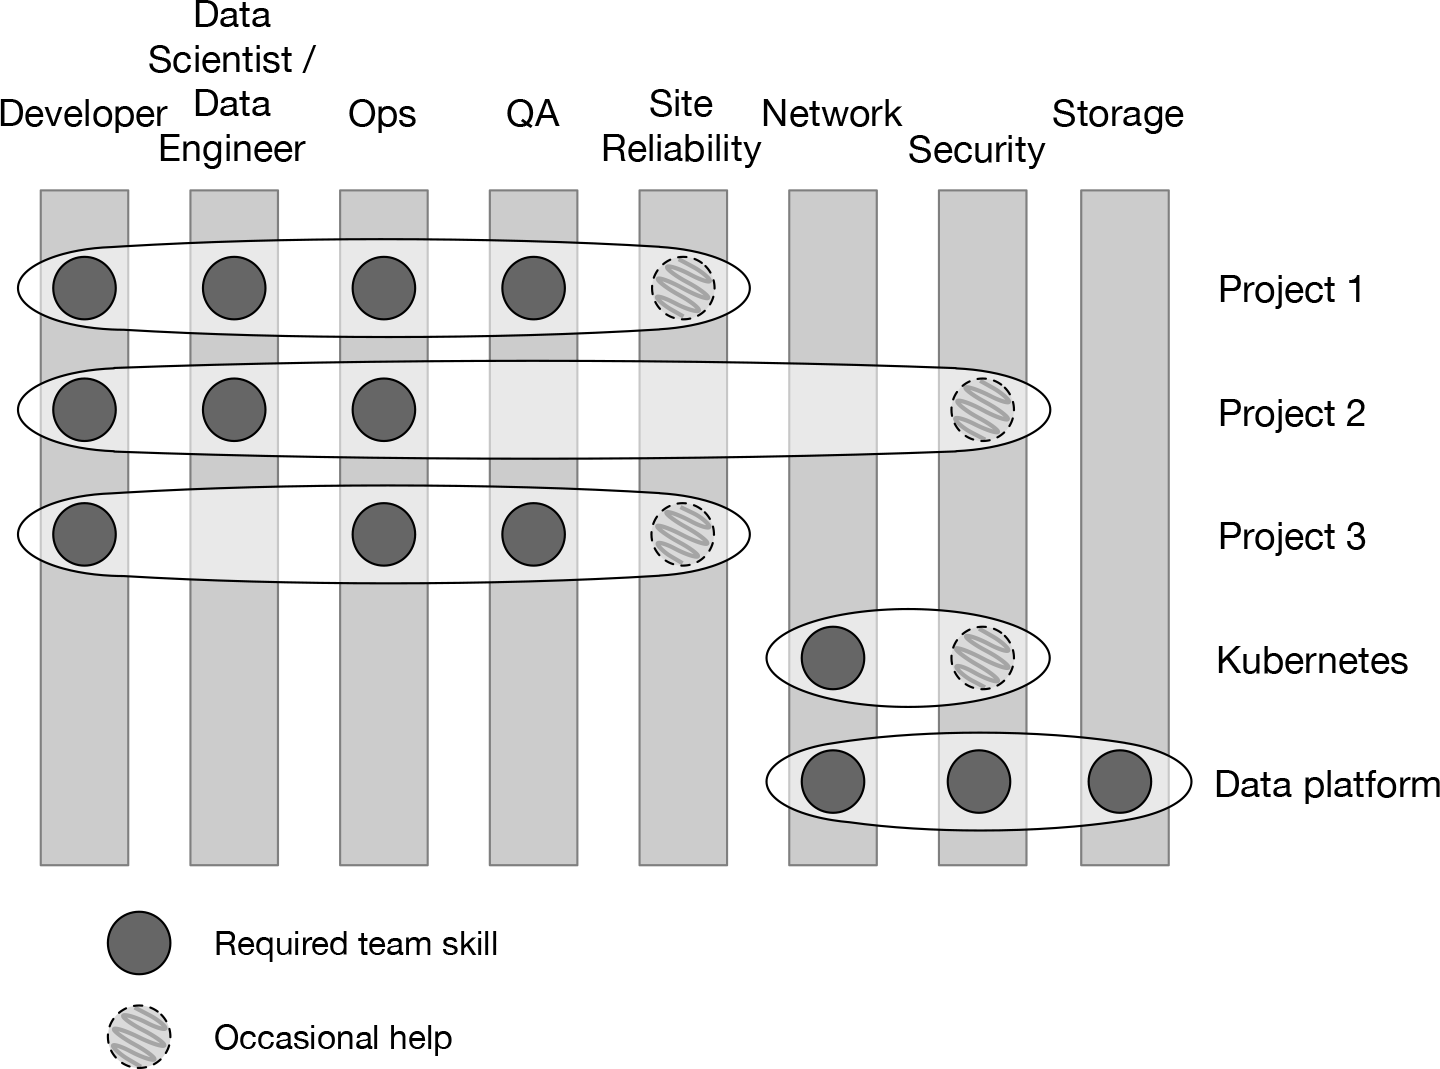 A DataOps style of work provides cross-skill teams (horizontal ovals), each focused on a shared goal. This diagram depicts teams for different applications (teams for Projects 1–3) as well as the separate teams for platform-level services (Kubernetes and the data platform). Note how the platform teams have very different skill mix than the other teams.